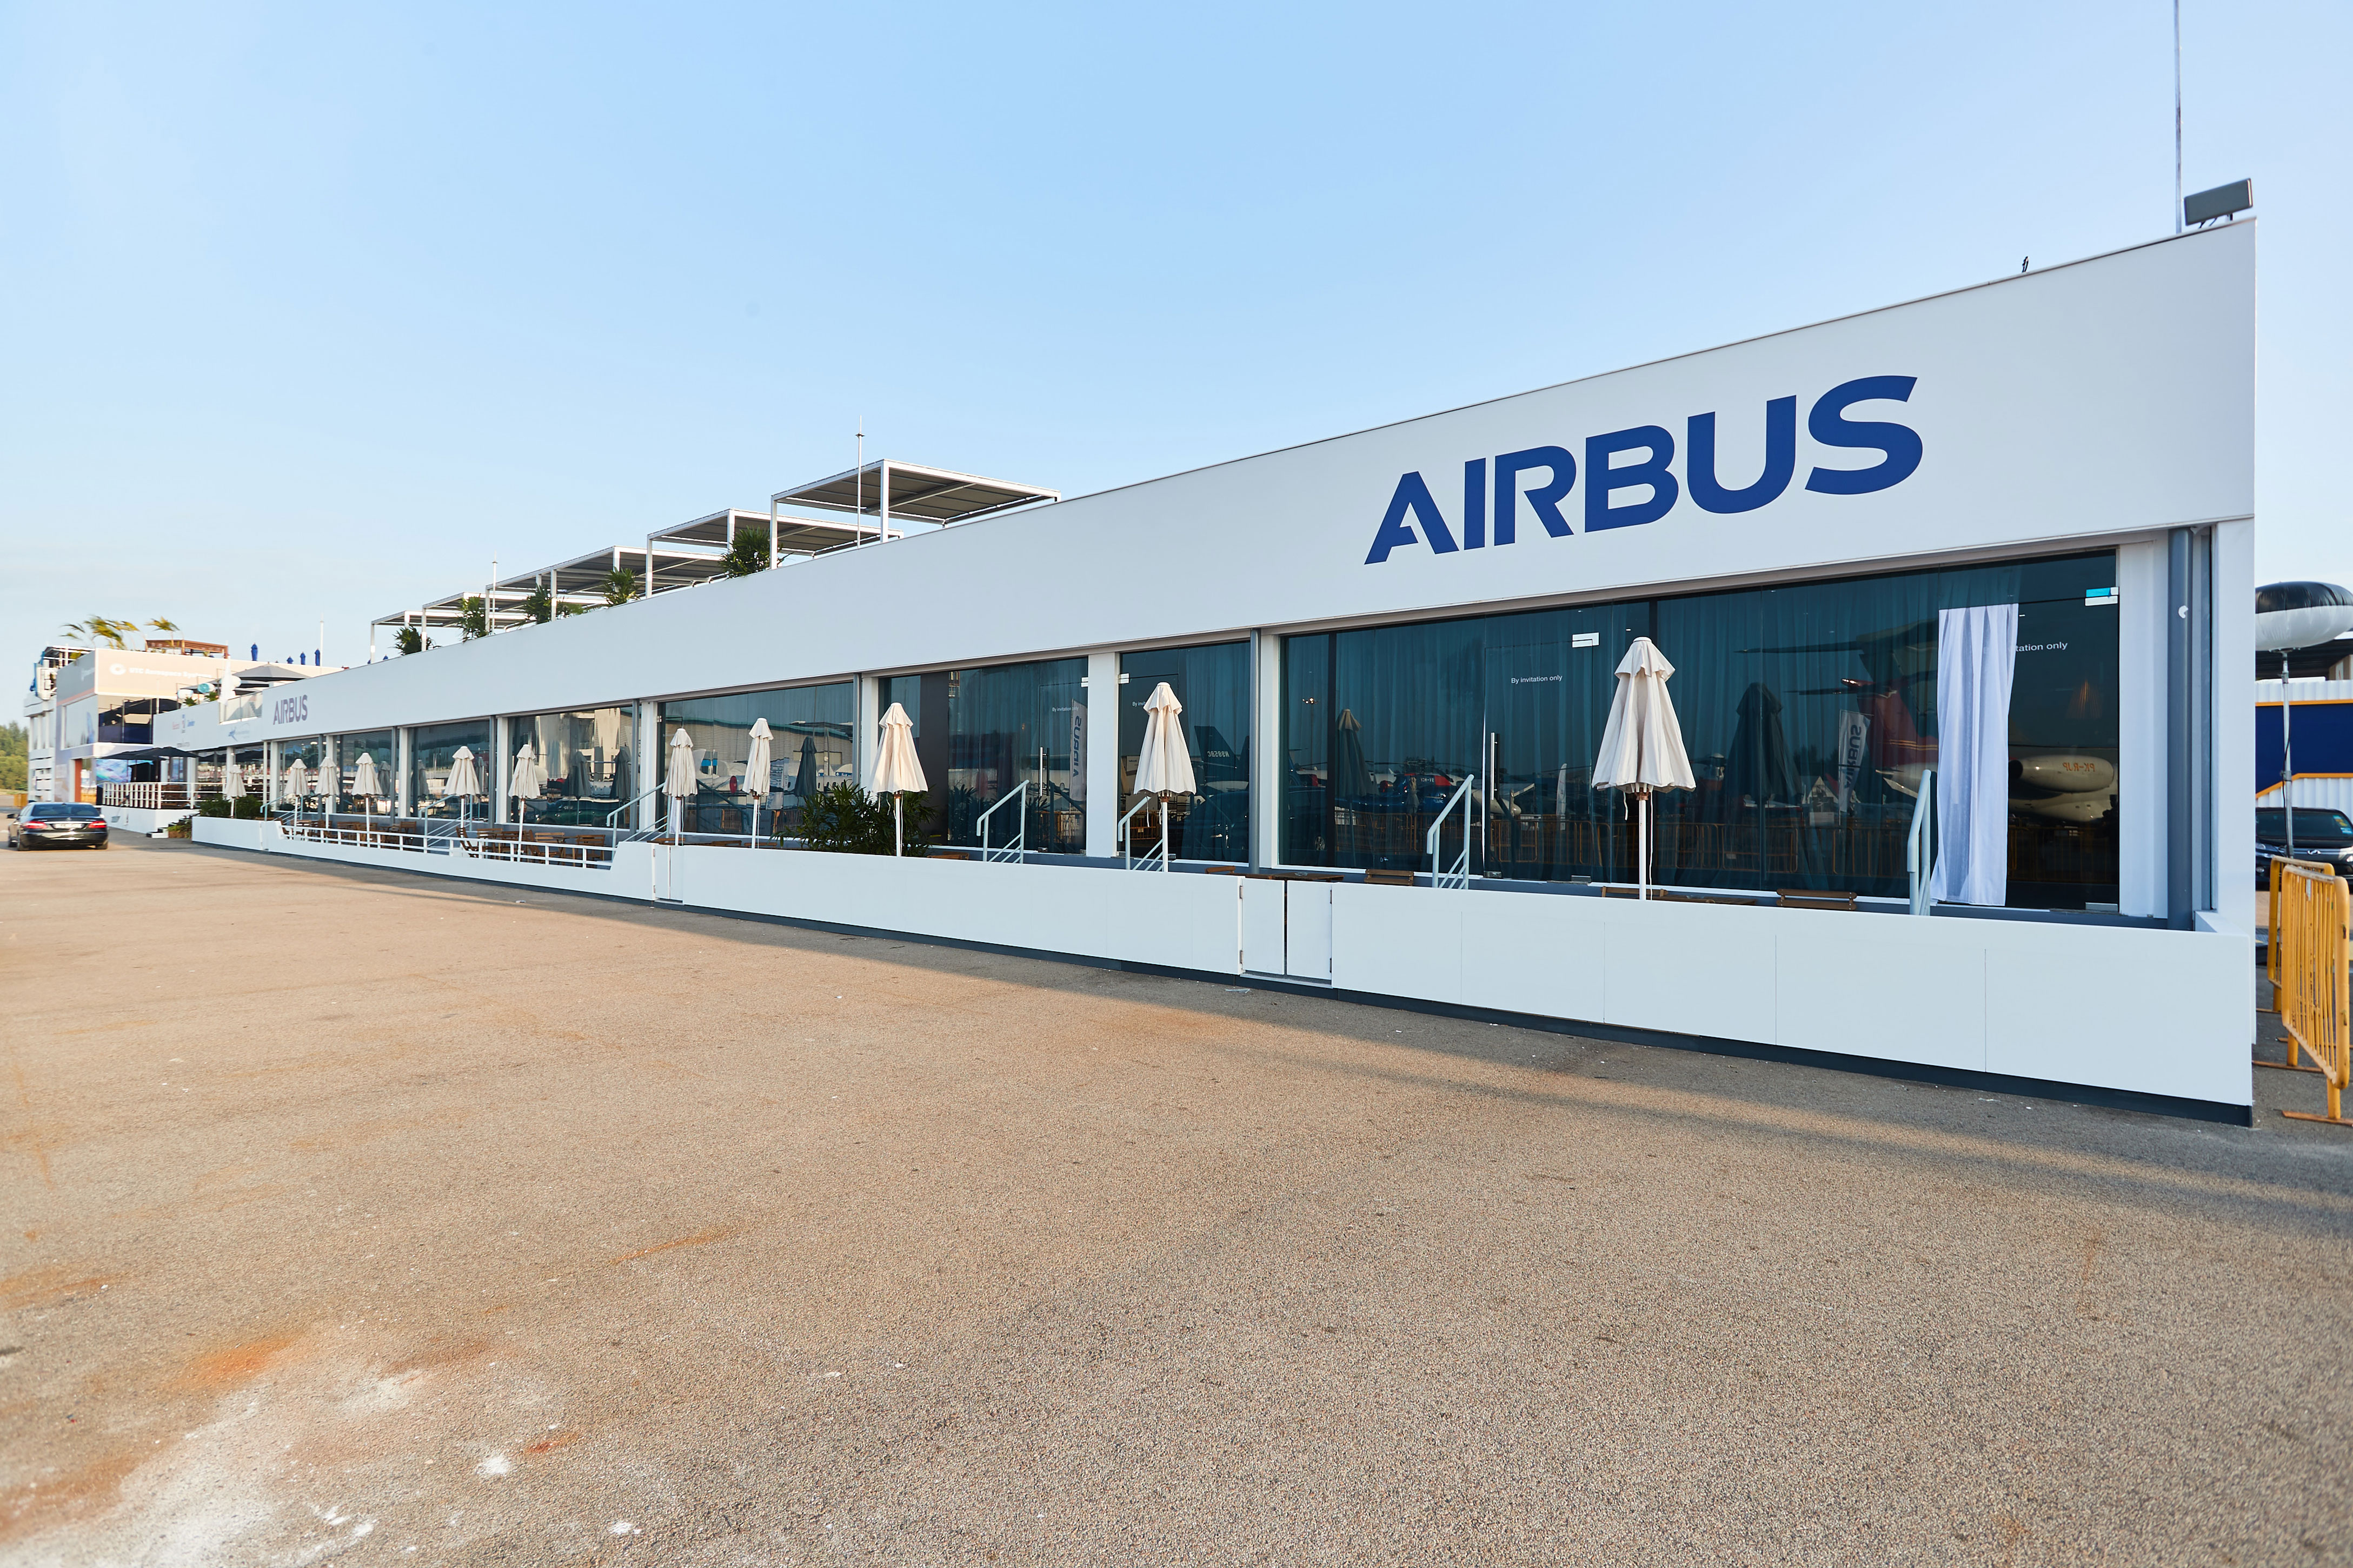 http://www.nestsolutionsgroup.com/wp-content/uploads/2019/02/AIRBUS_065.jpg